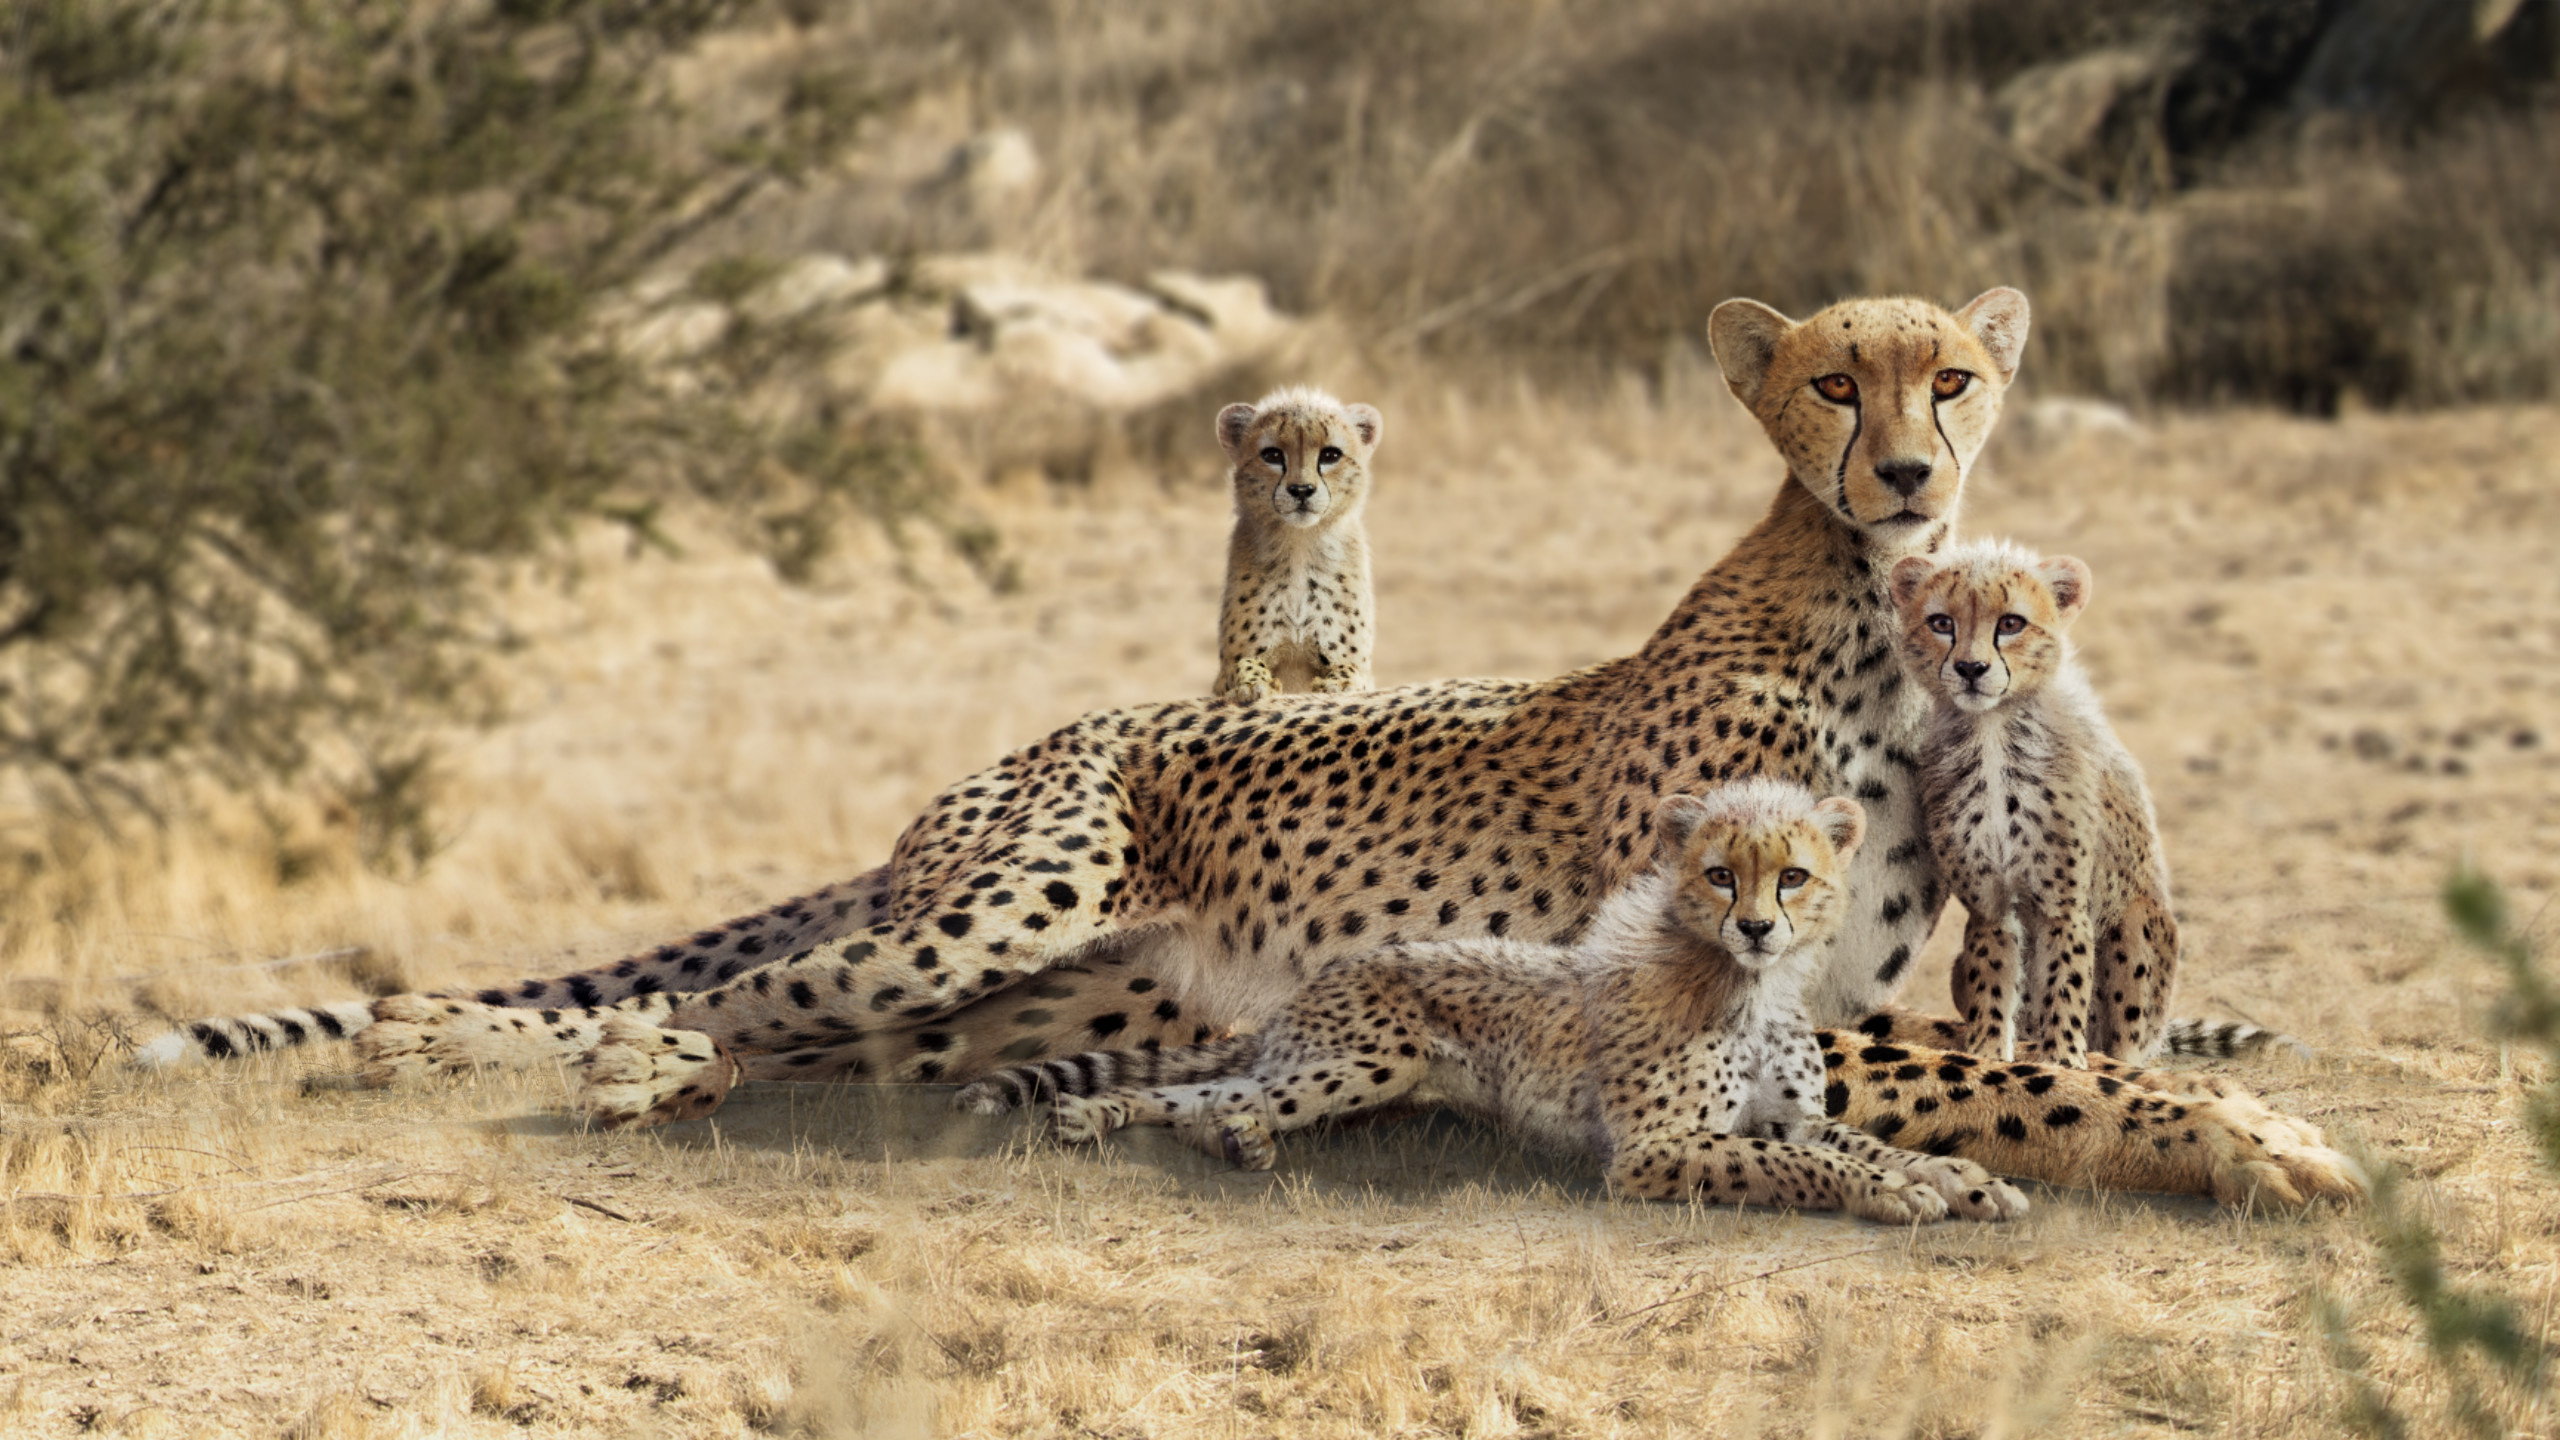 Cheetah and young cheetah, Artistic portrayal, Endearing scene, Emotional connection, 2560x1440 HD Desktop